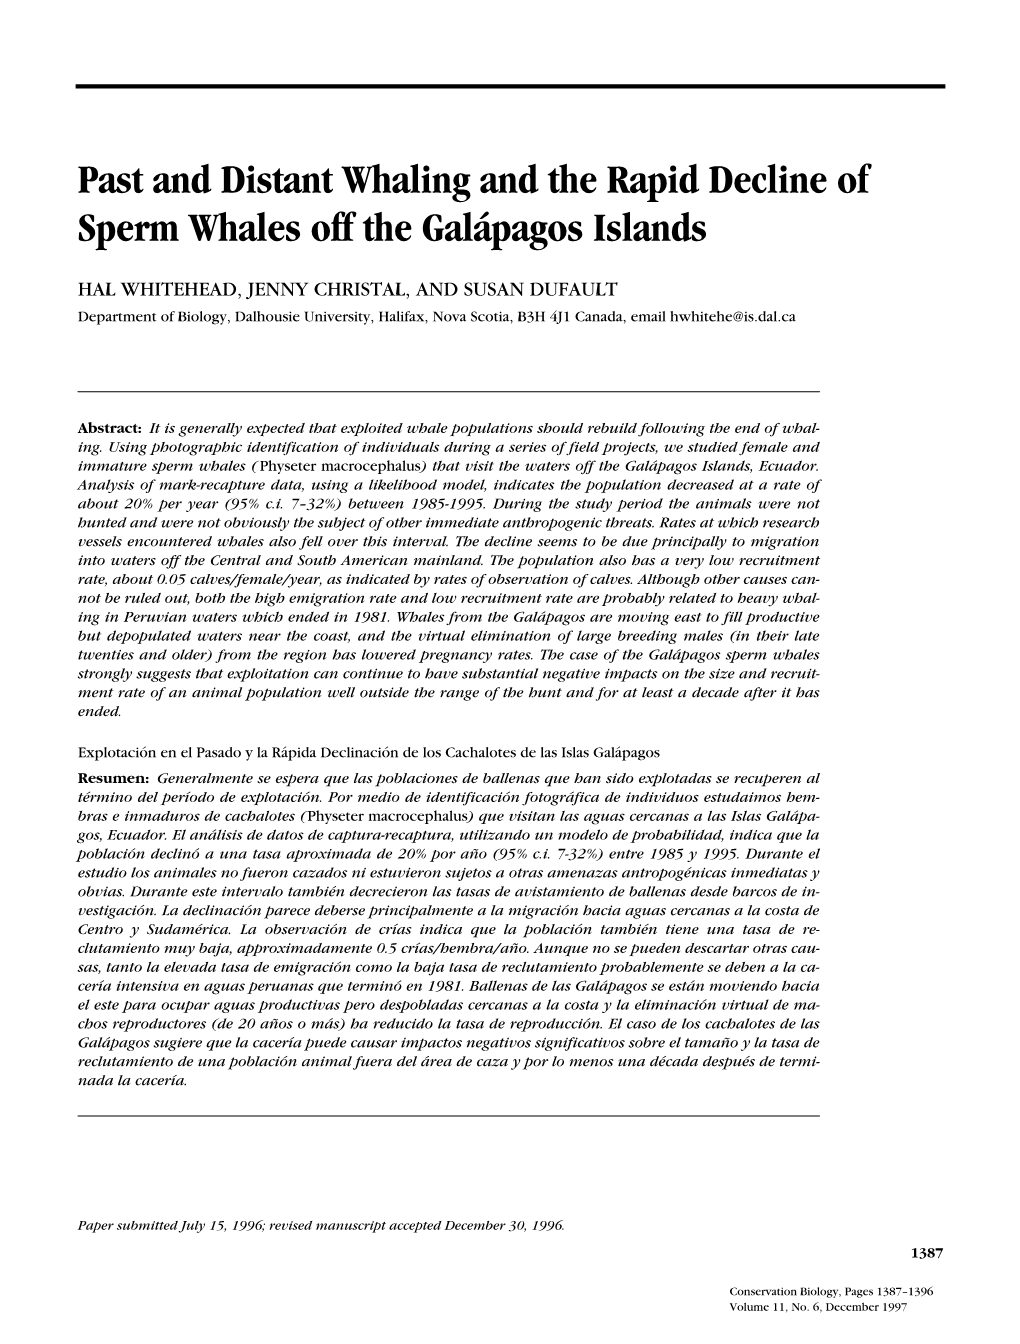 Past and Distant Whaling and the Rapid Decline of Sperm Whales Off the Galápagos Islands